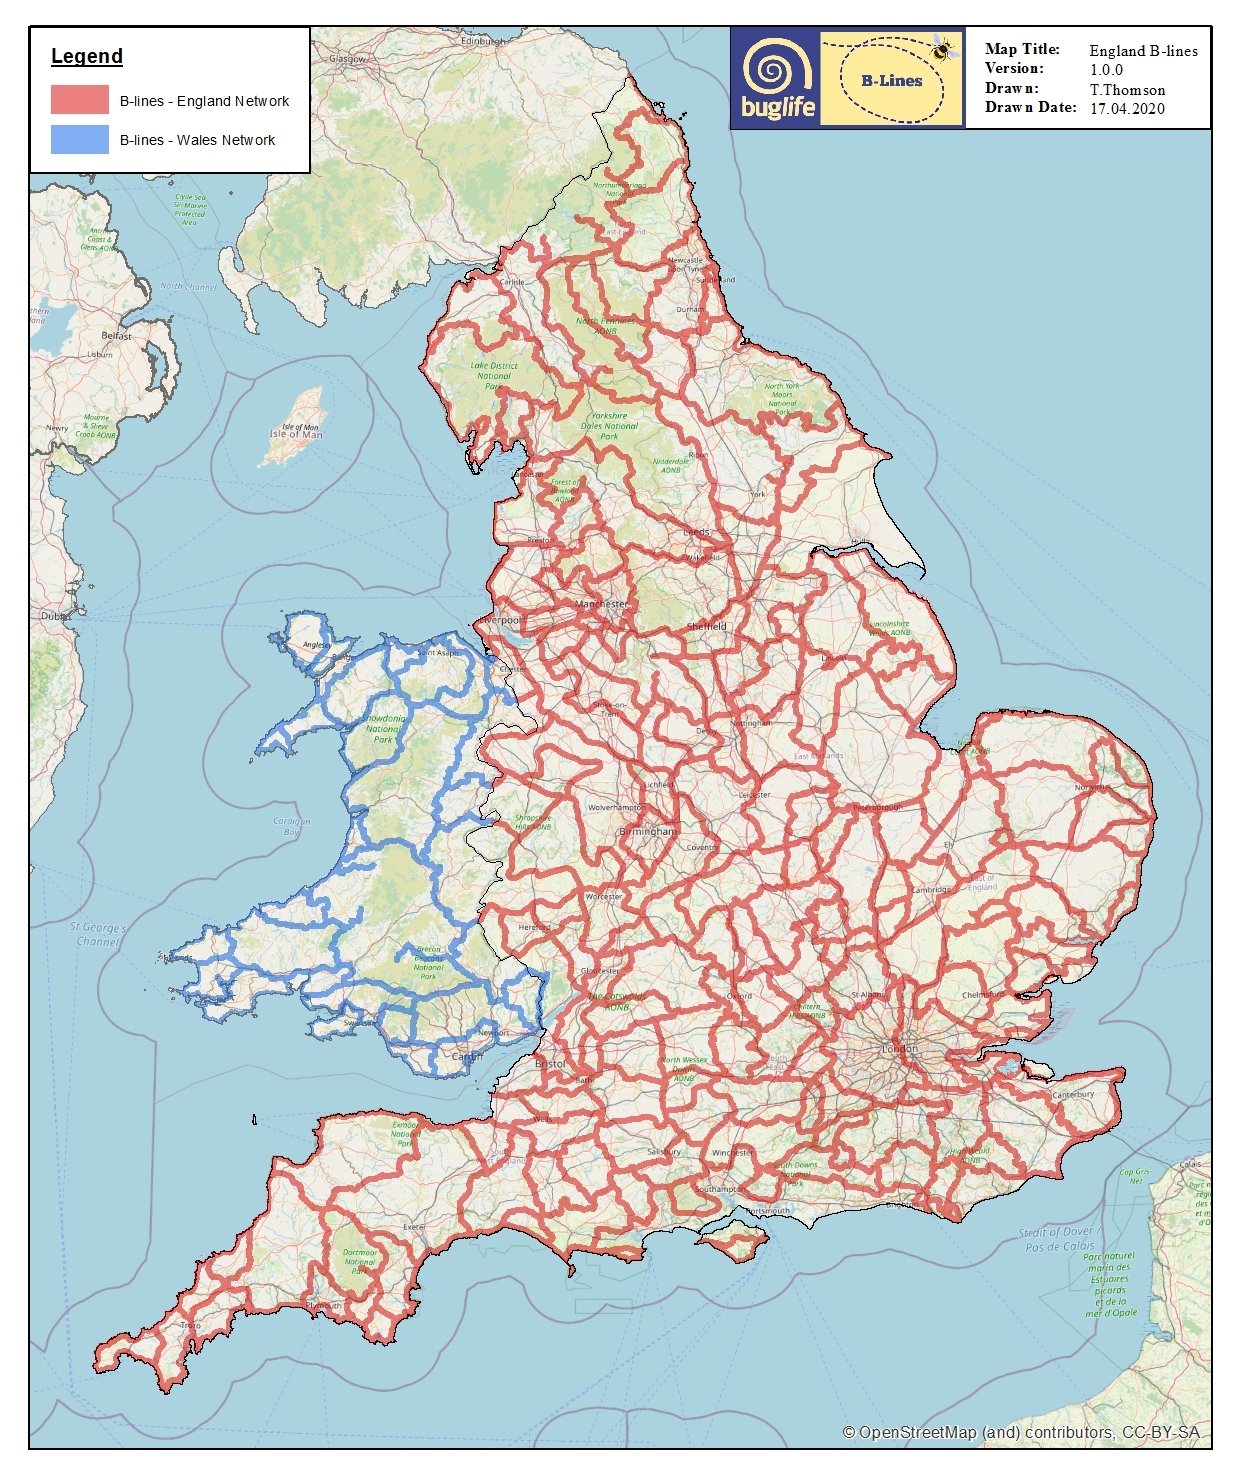 England's map of B-Lines has been launched (Buglife)